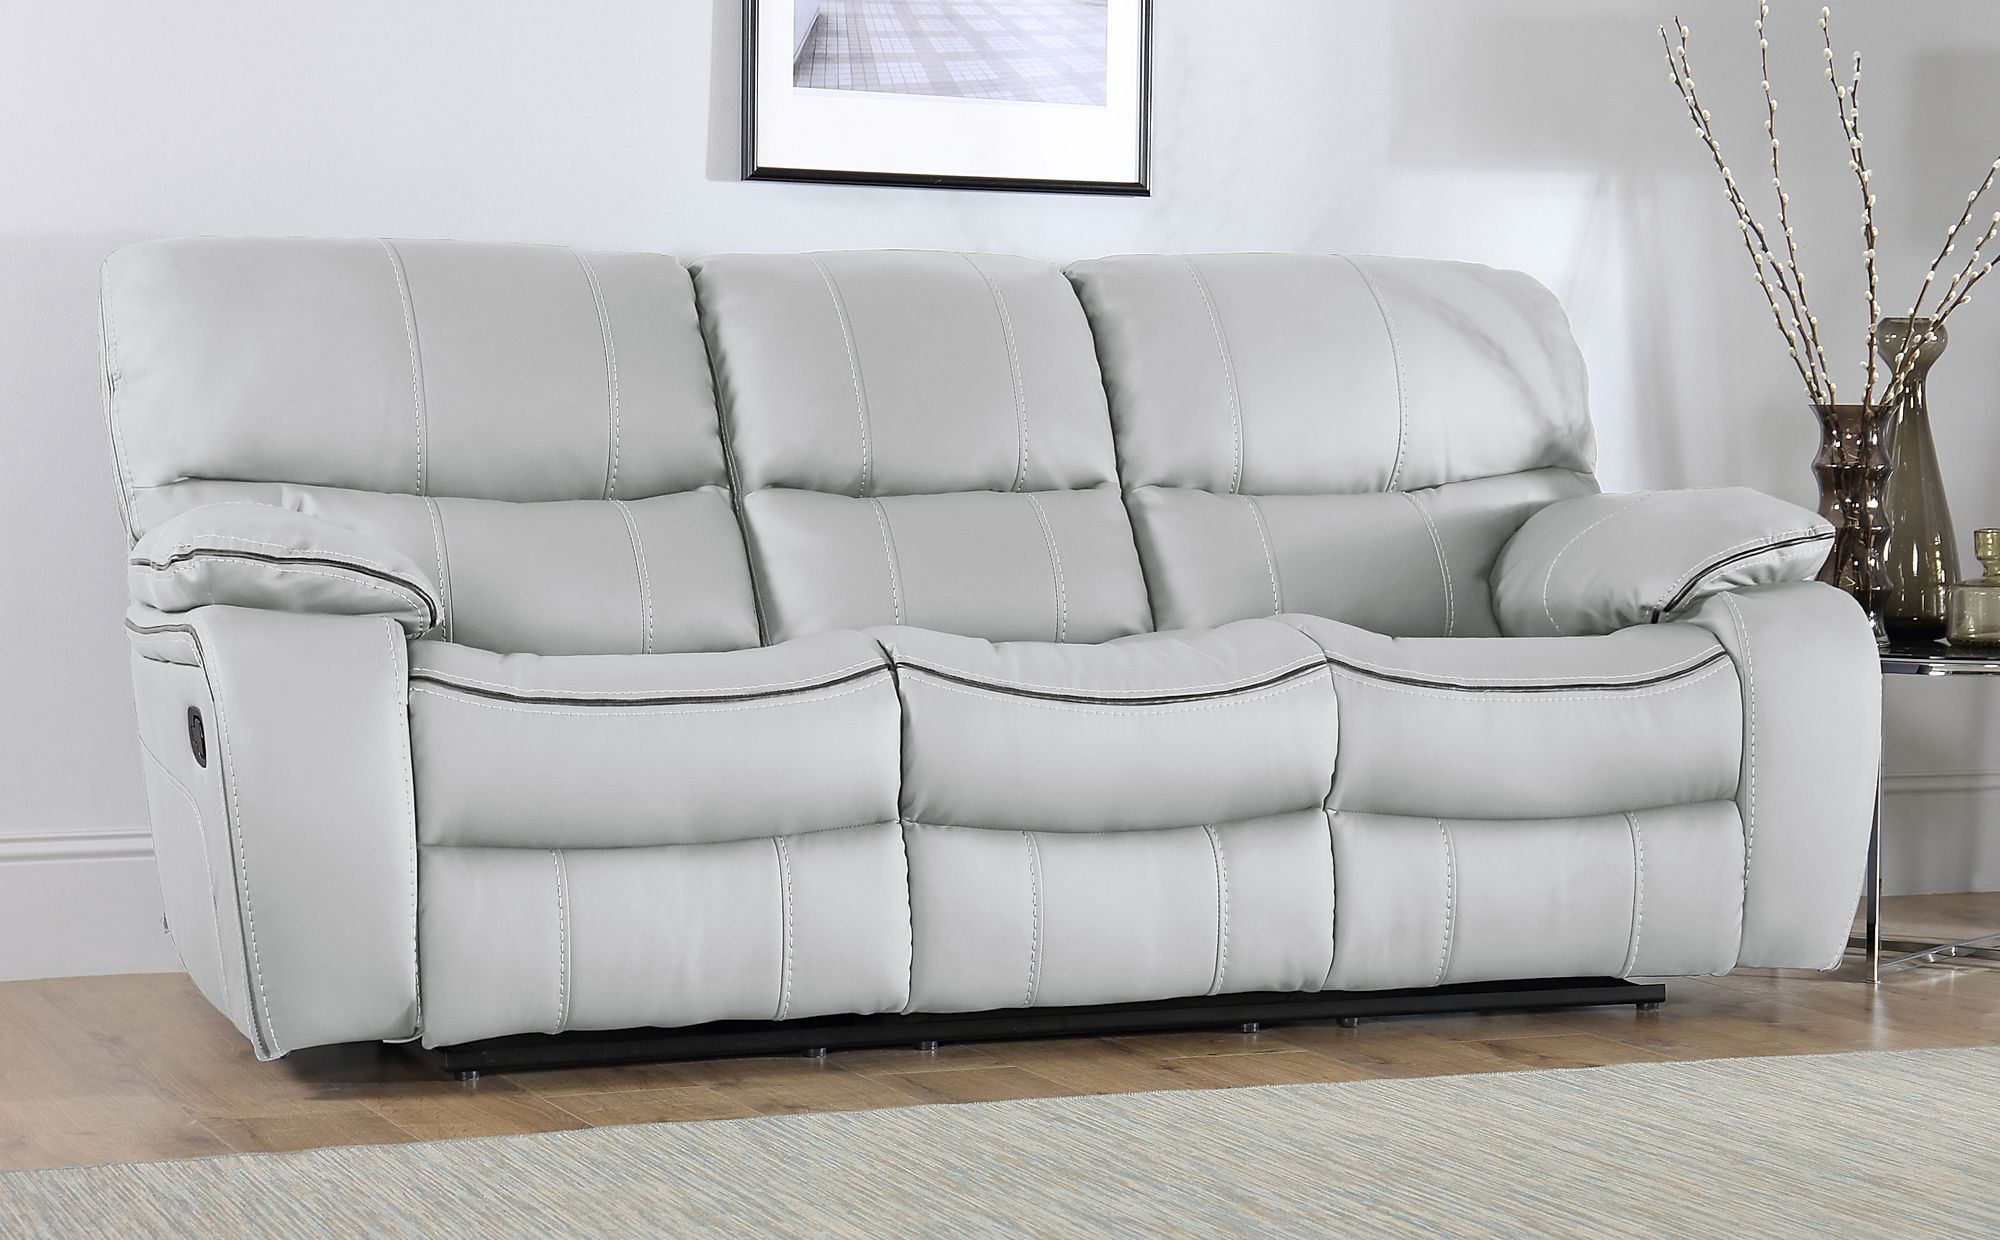 Beaumont Light Grey Leather 3 Seater Recliner Sofa | Furniture Choice Intended For Sofas In Light Gray (View 5 of 22)